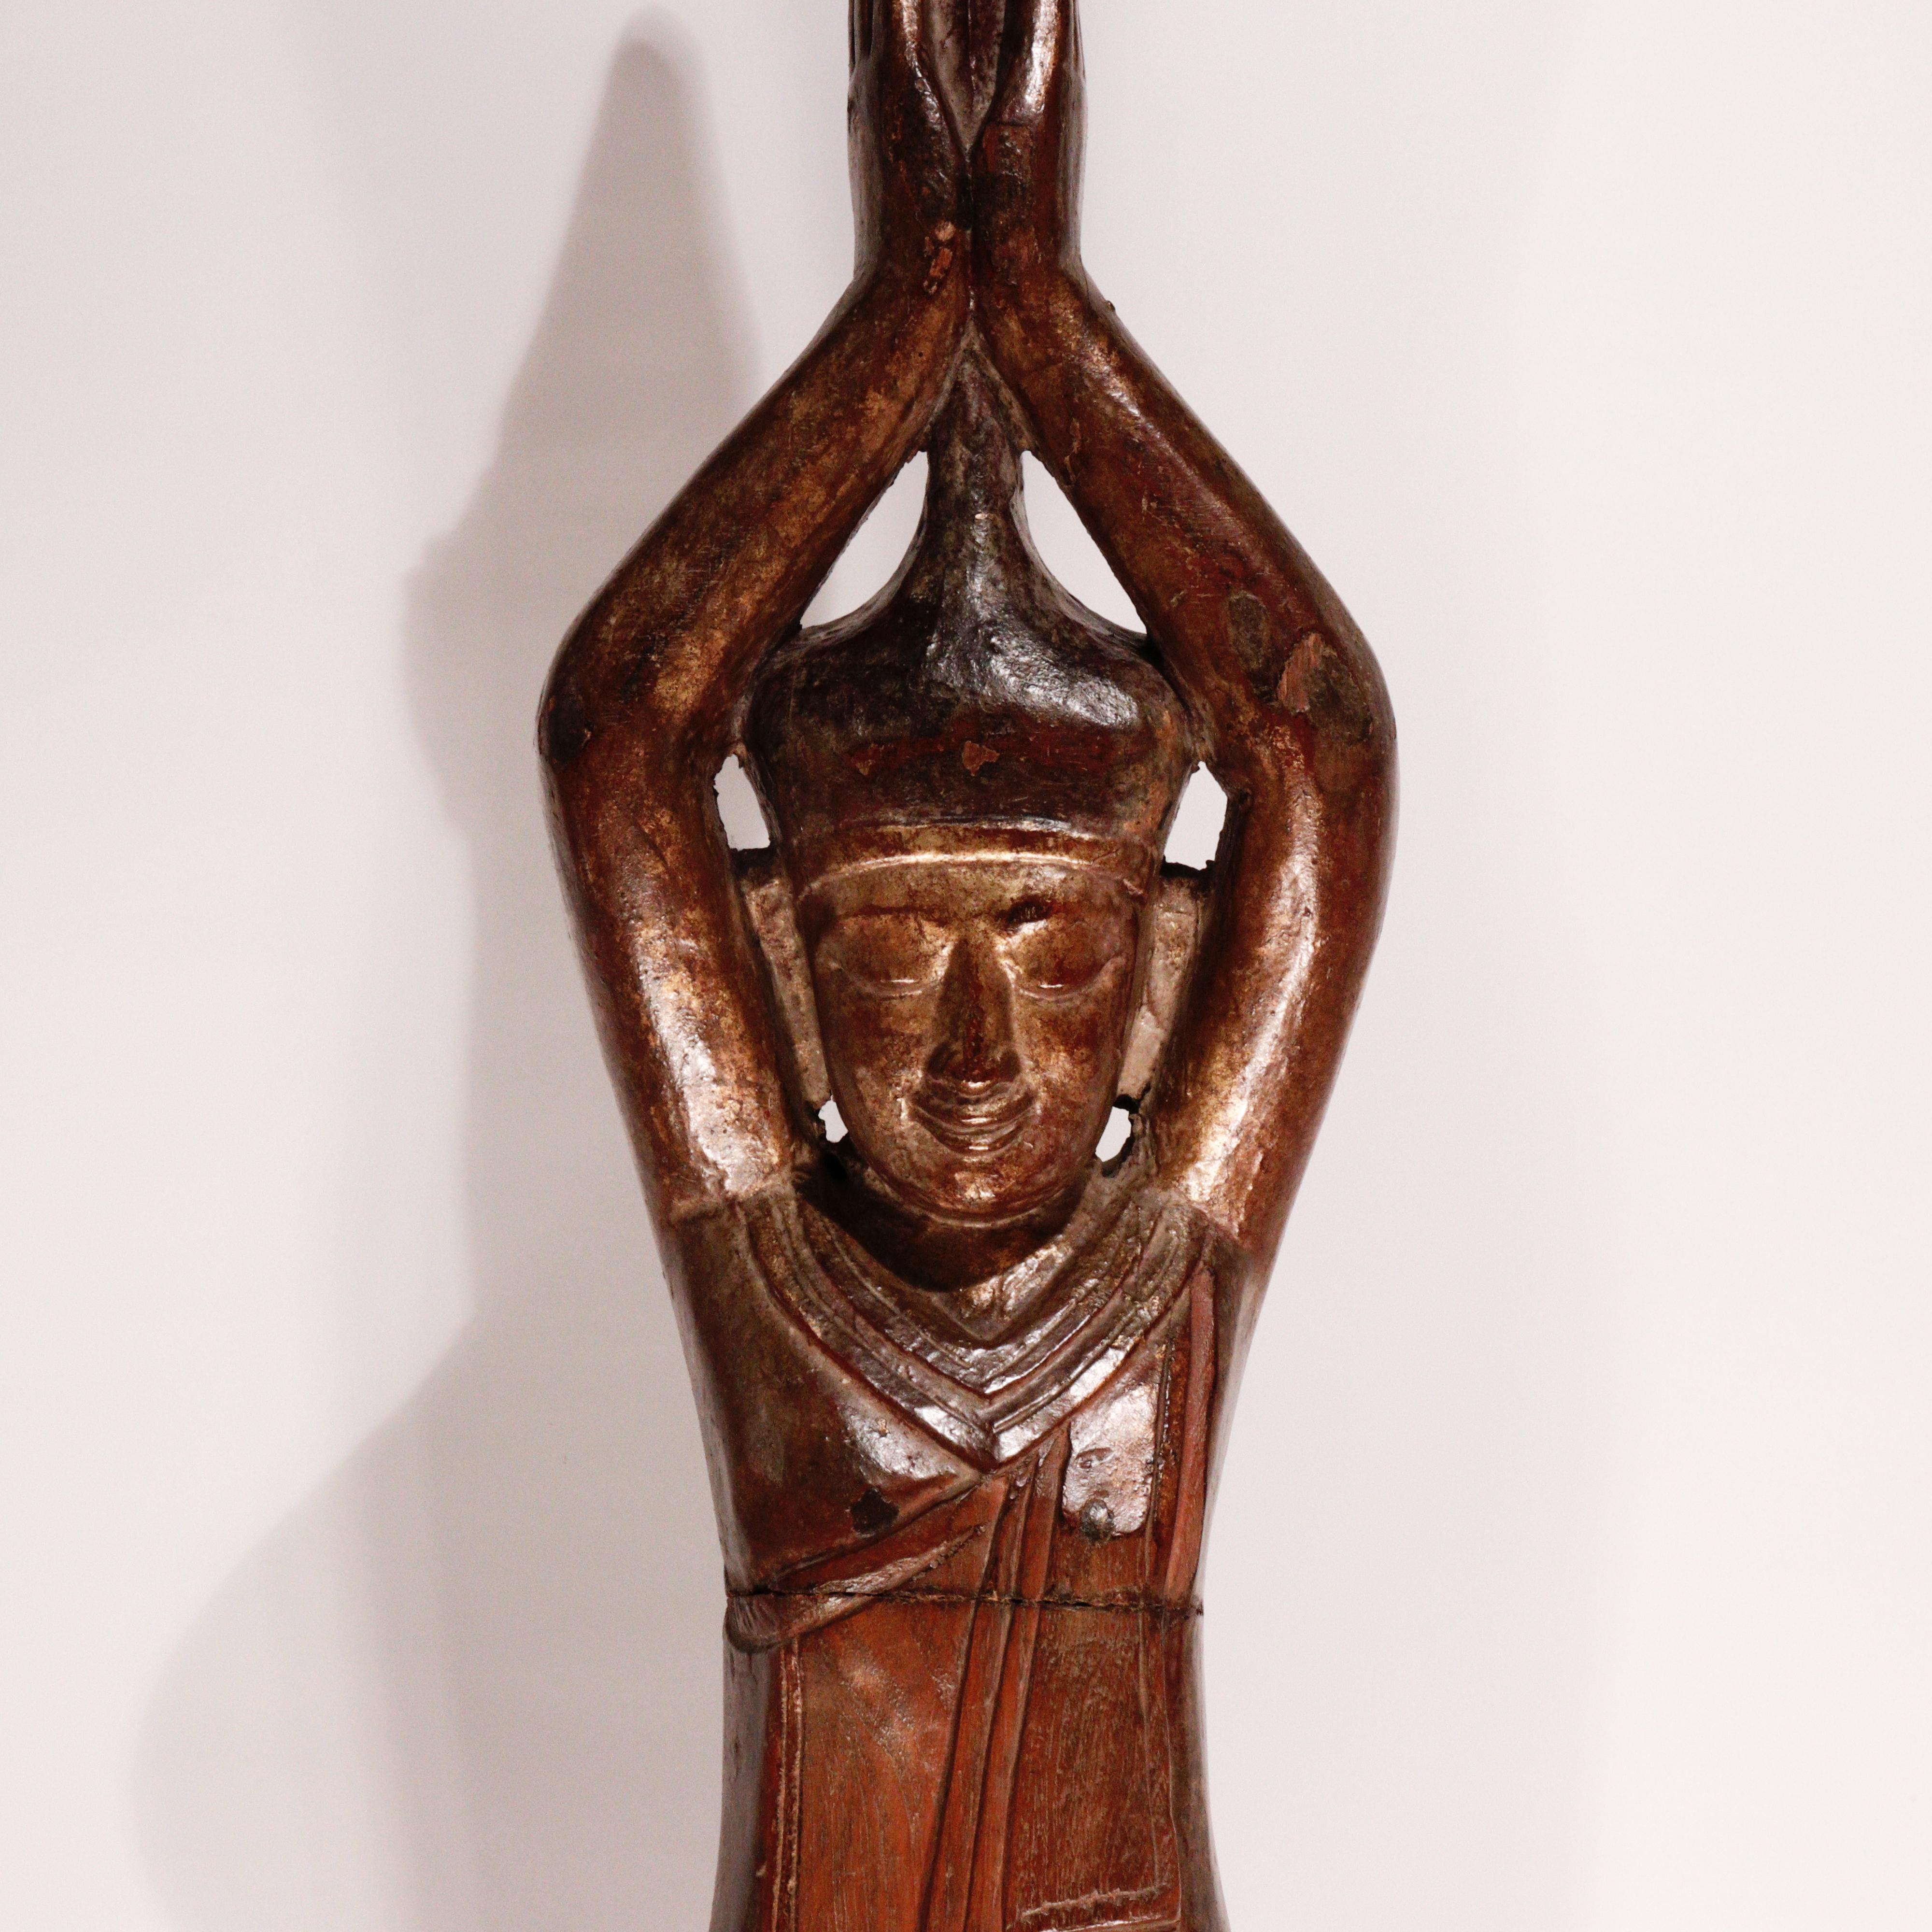 Burmese carved solid wood image of the Hermit Sumedha, known for lying down and stretching his body thin before the Dipankara Buddha, using his body as a bridge so that the Buddha would not have to walk in the mud and who in turn prophesied that